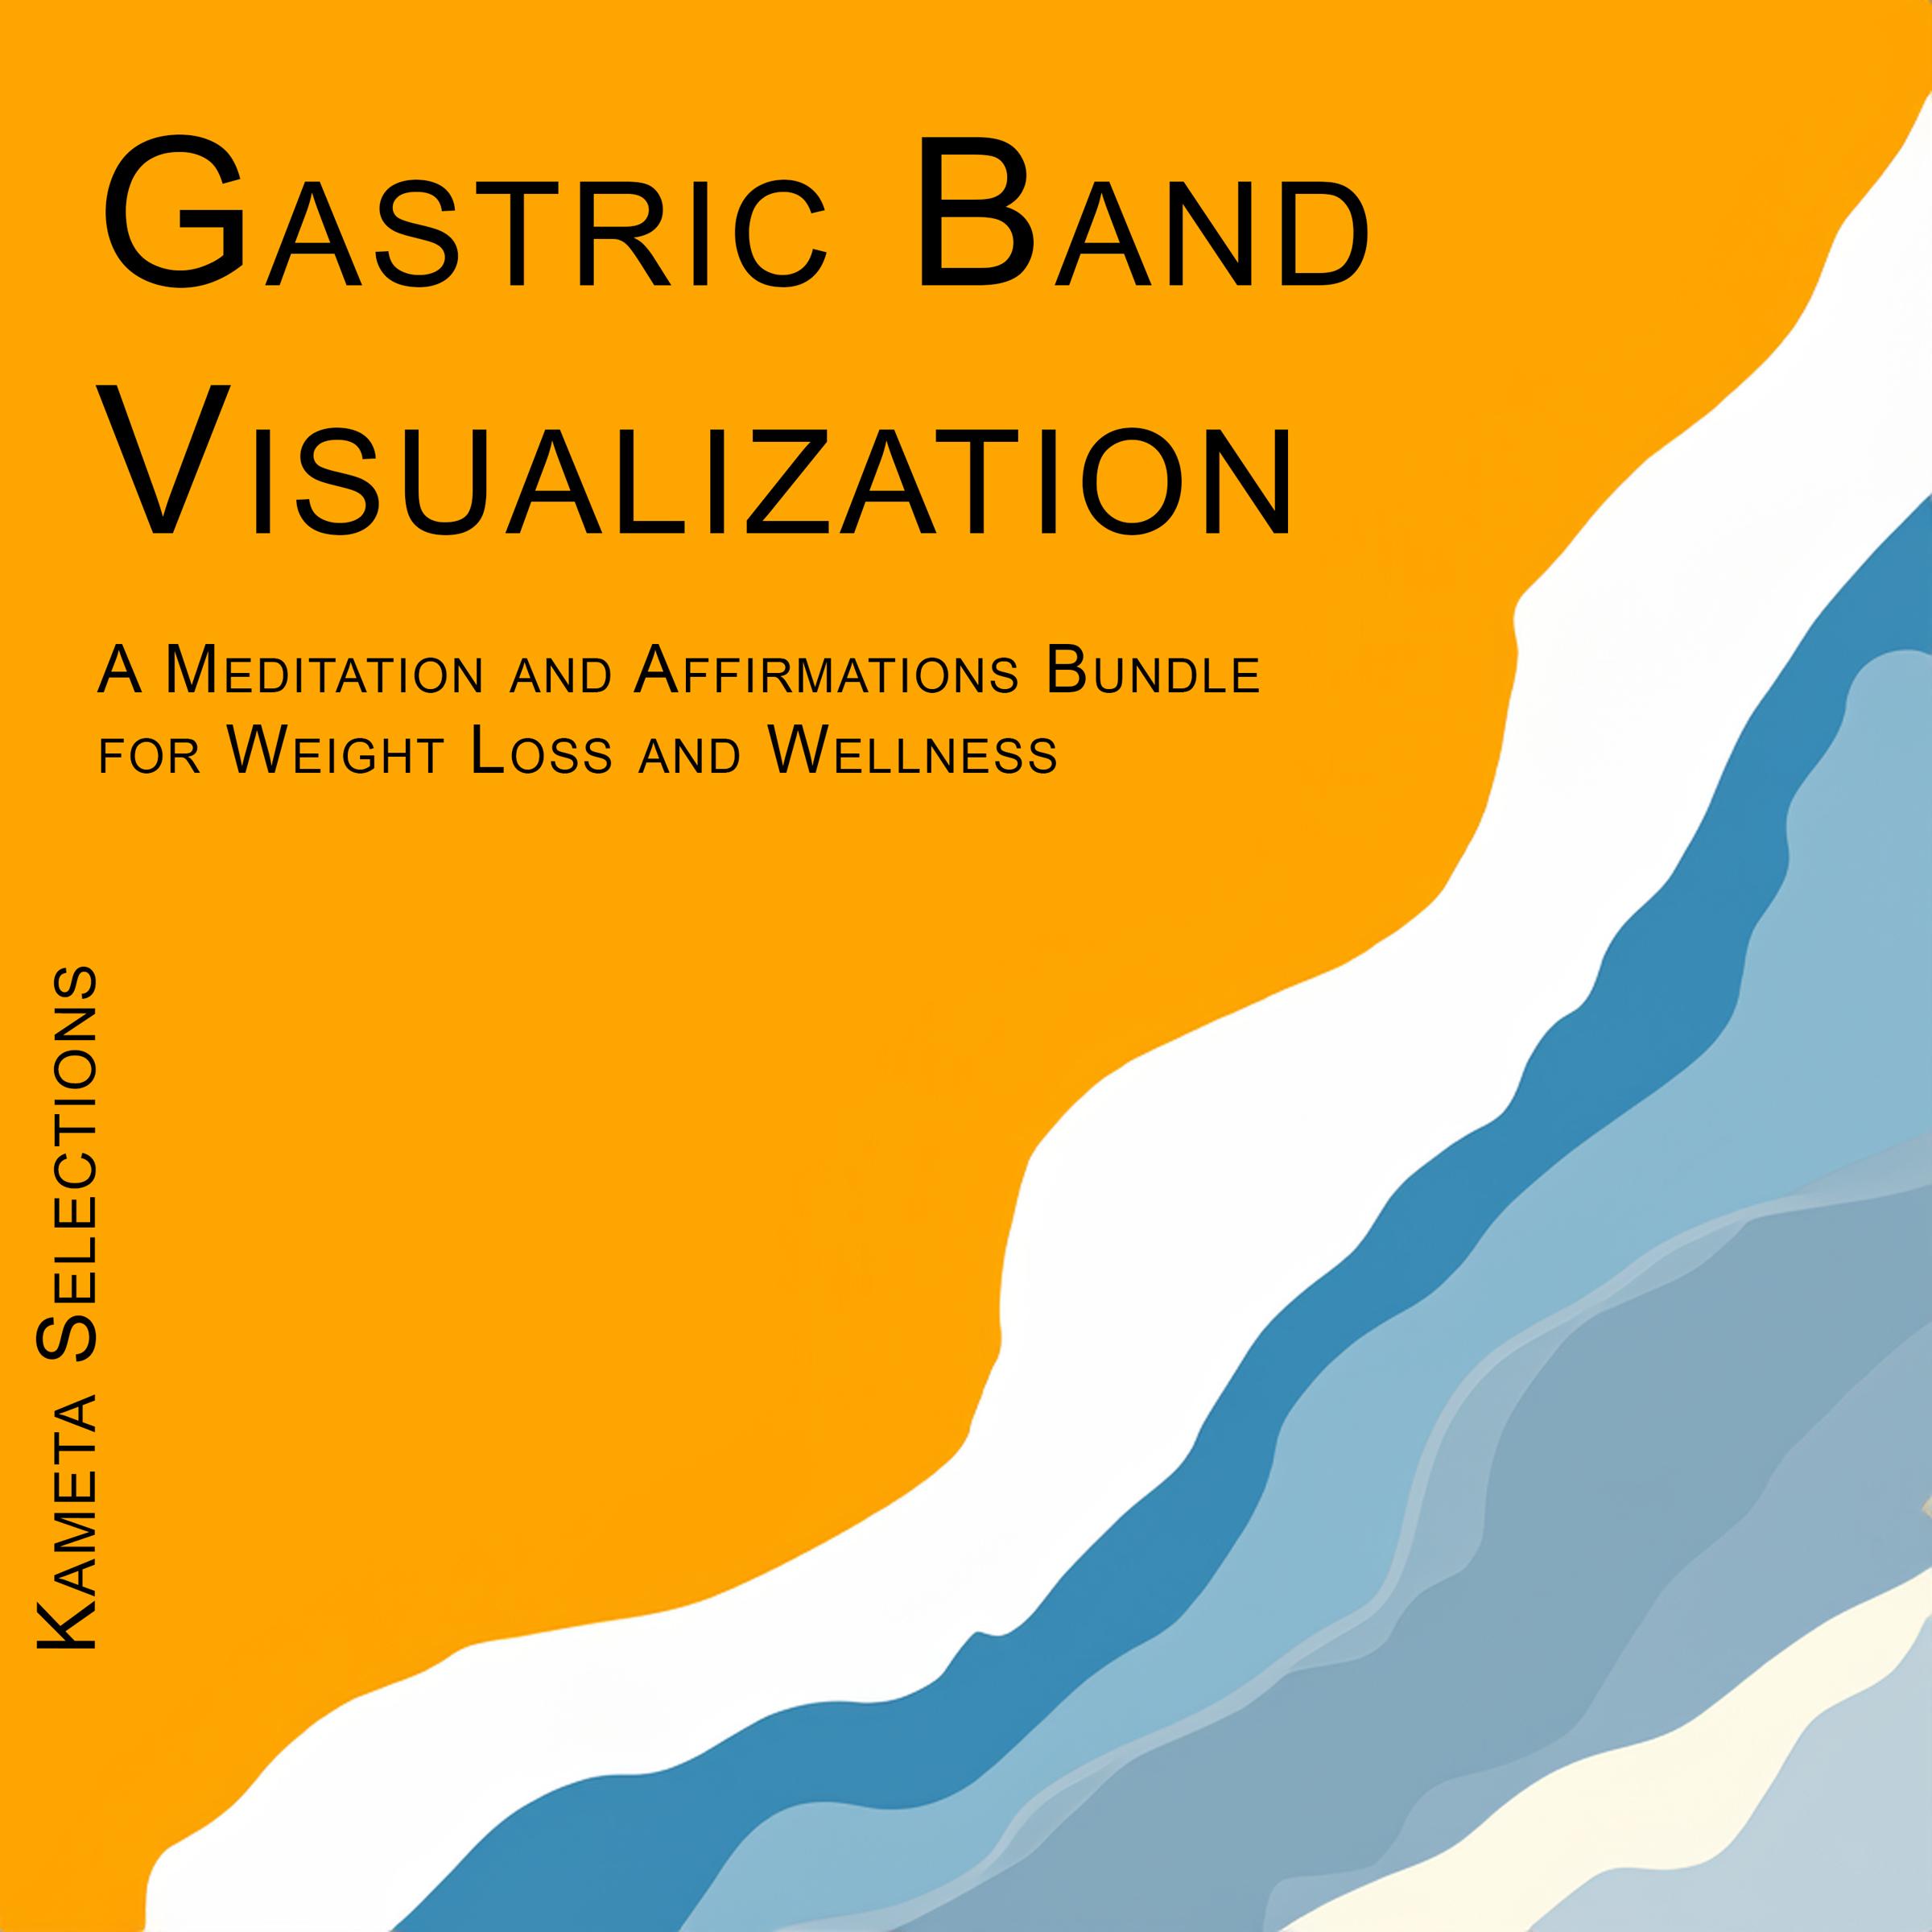 Gastric Band Visualization: A Meditation and Affirmations Bundle for Weight Loss and Wellness